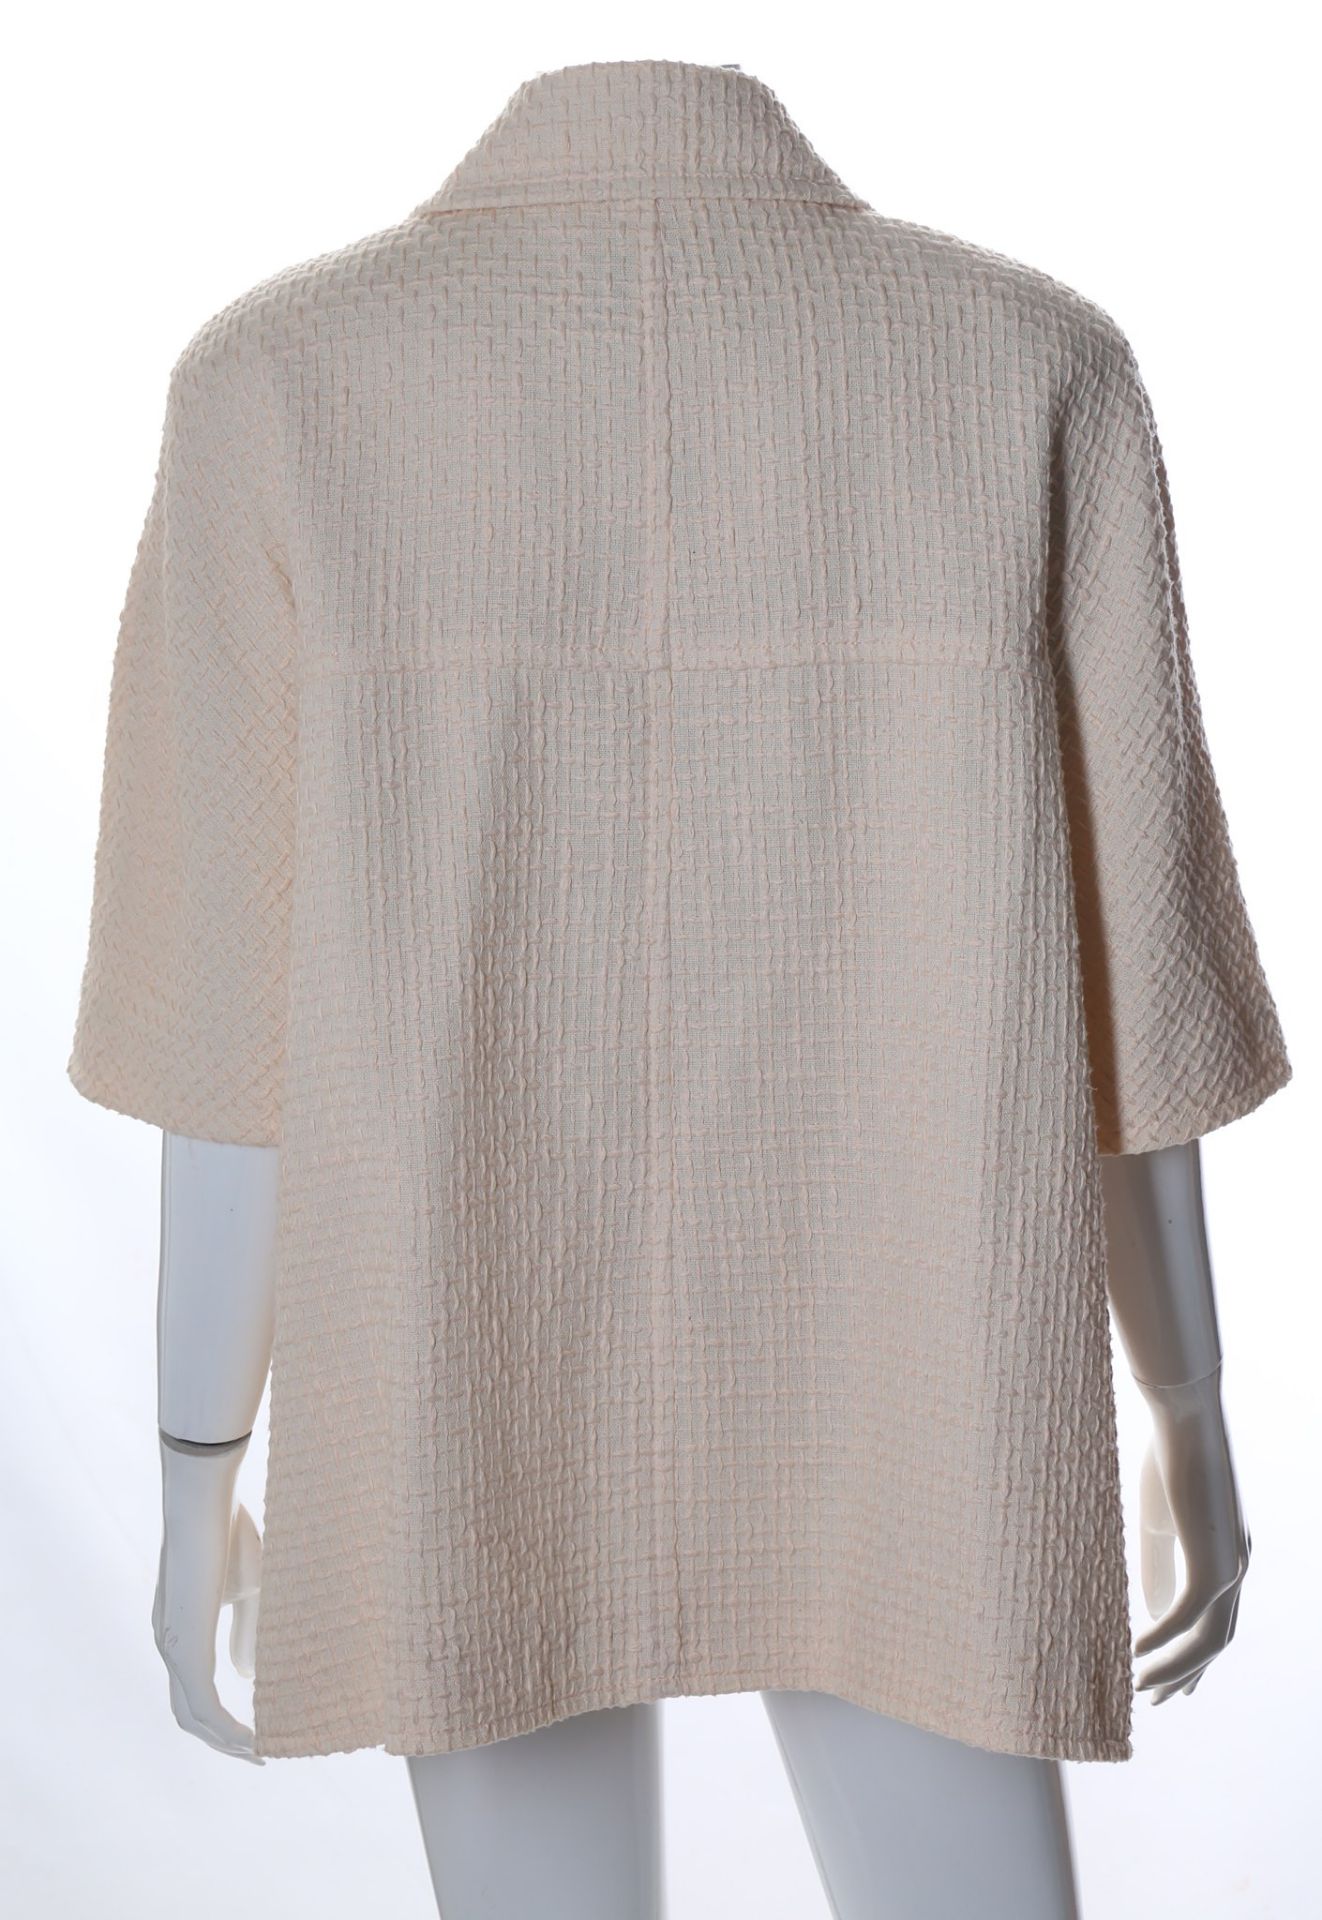 Chanel Pale Pink Cotton Jacket, 2010s, short sleev - Image 4 of 5